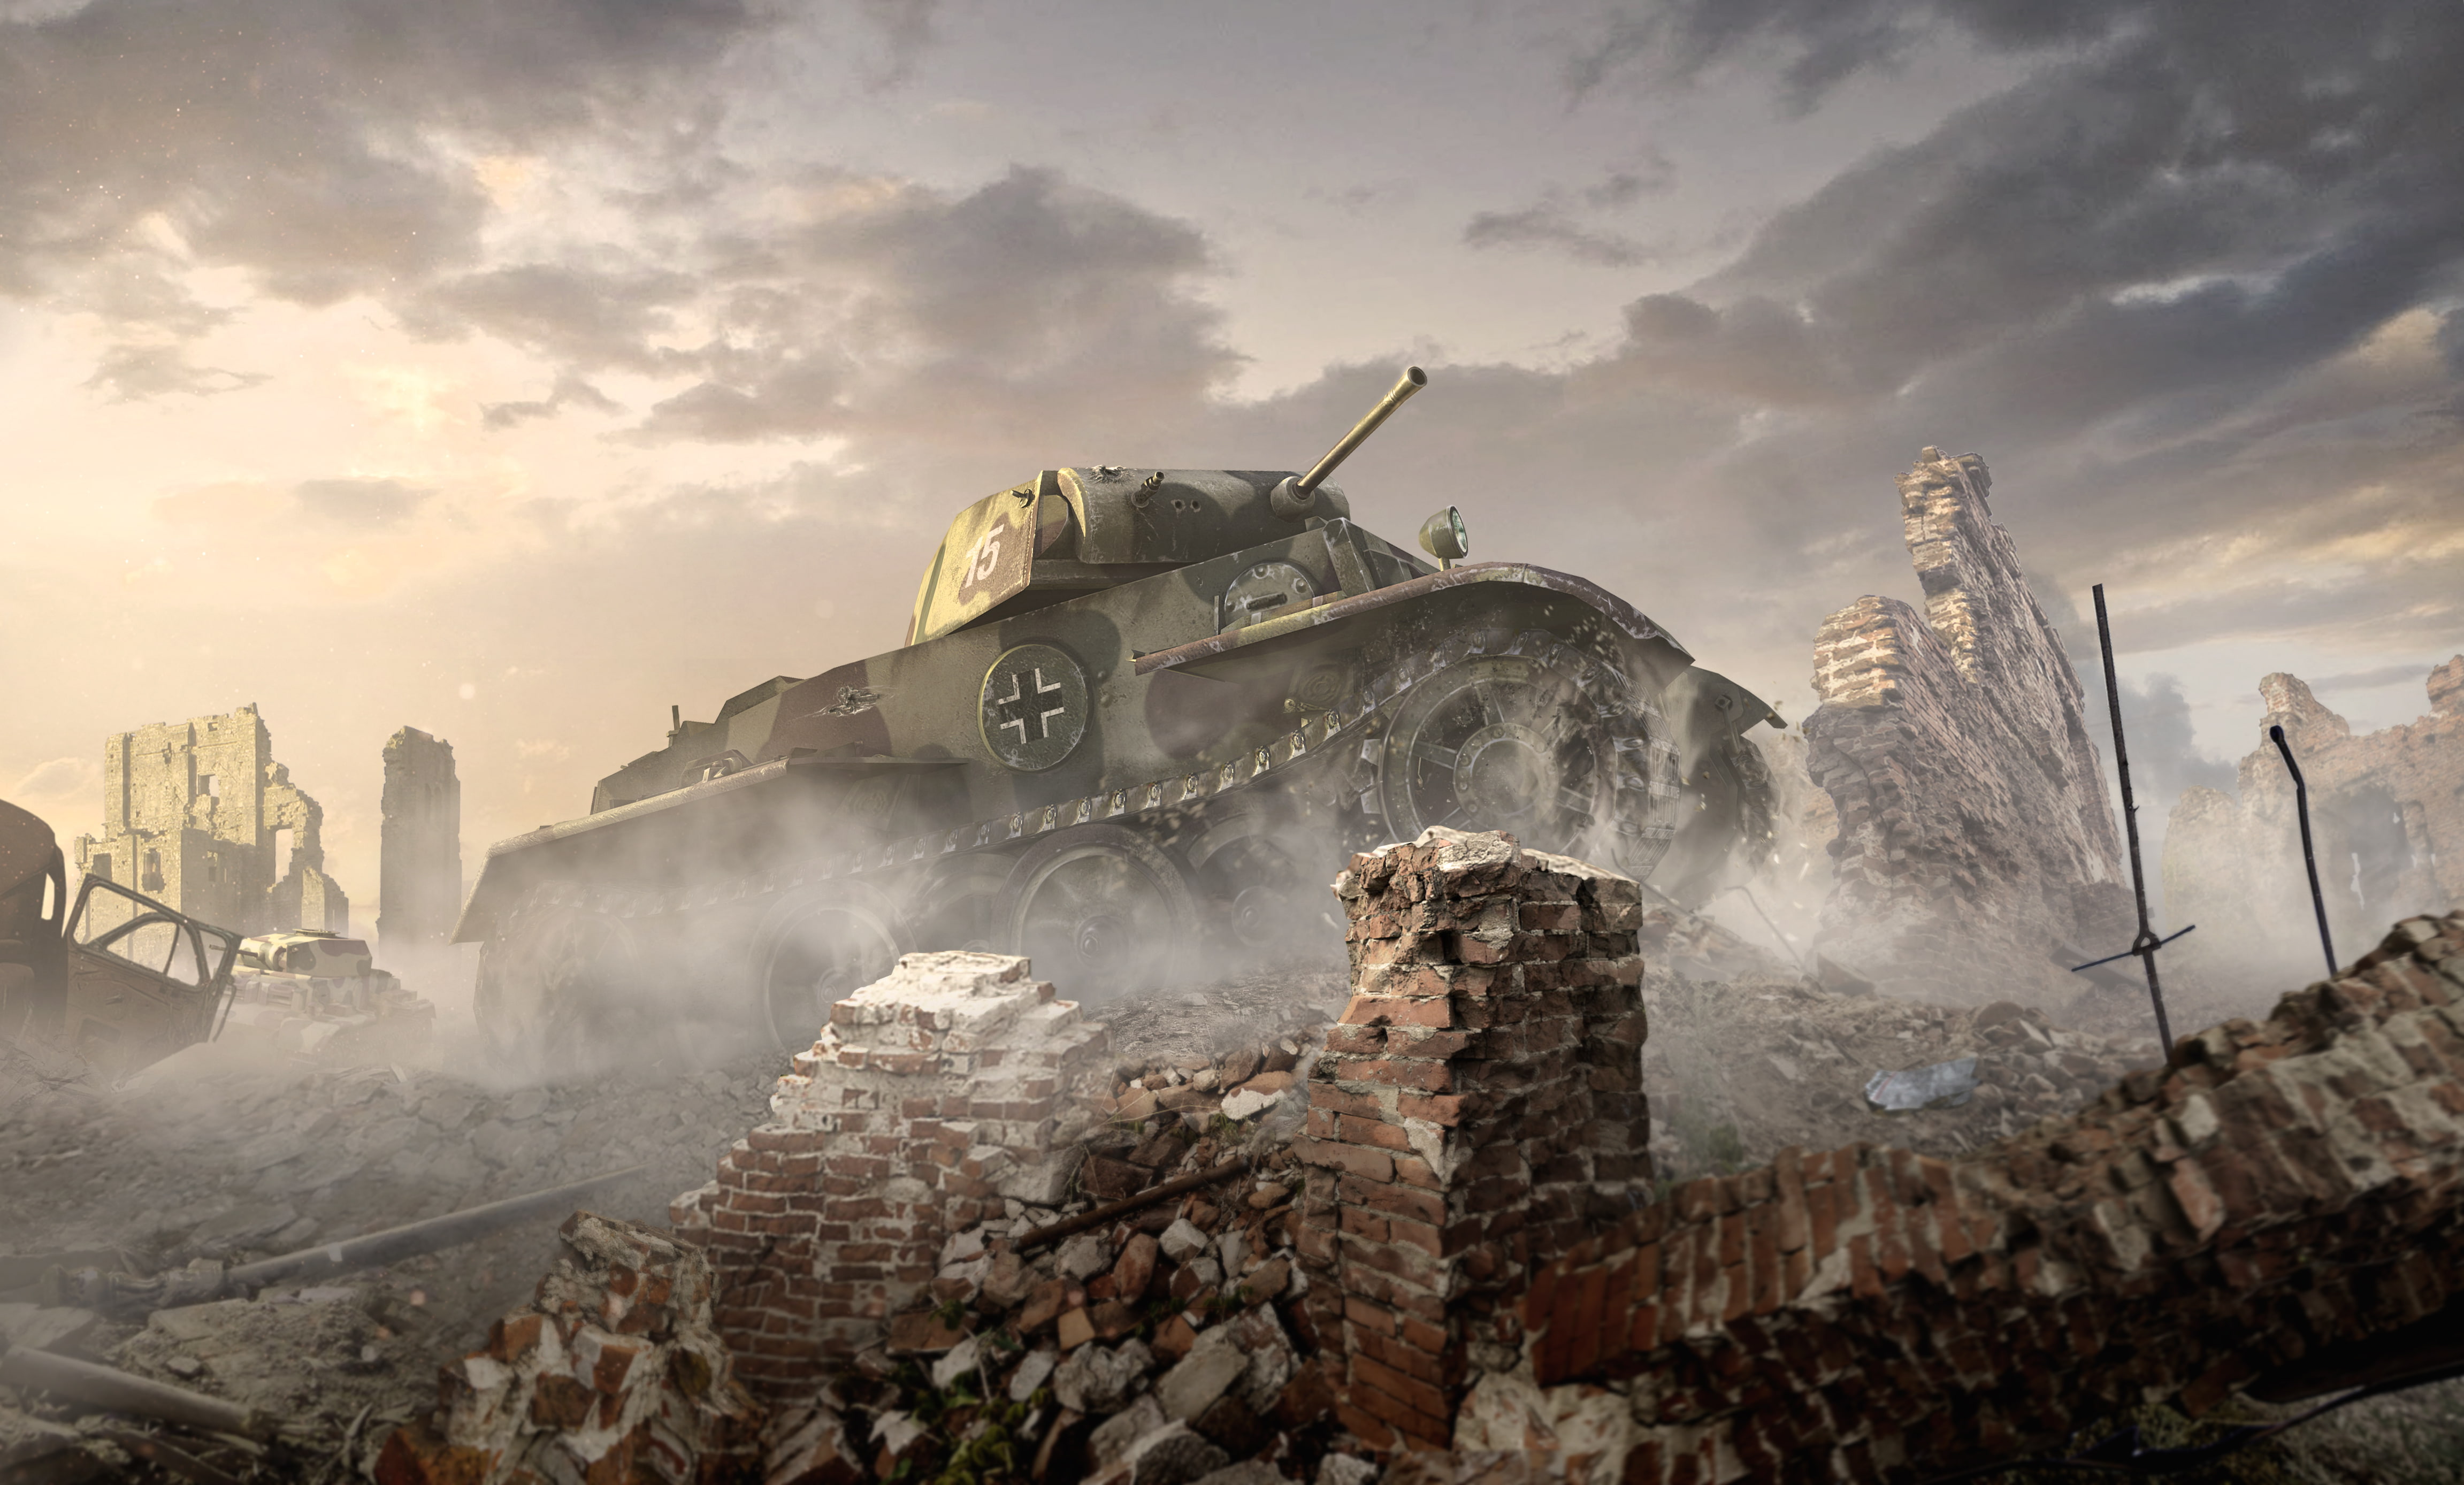 gray and green army tank wallpaper, The sky, Clouds, Dust, Smoke